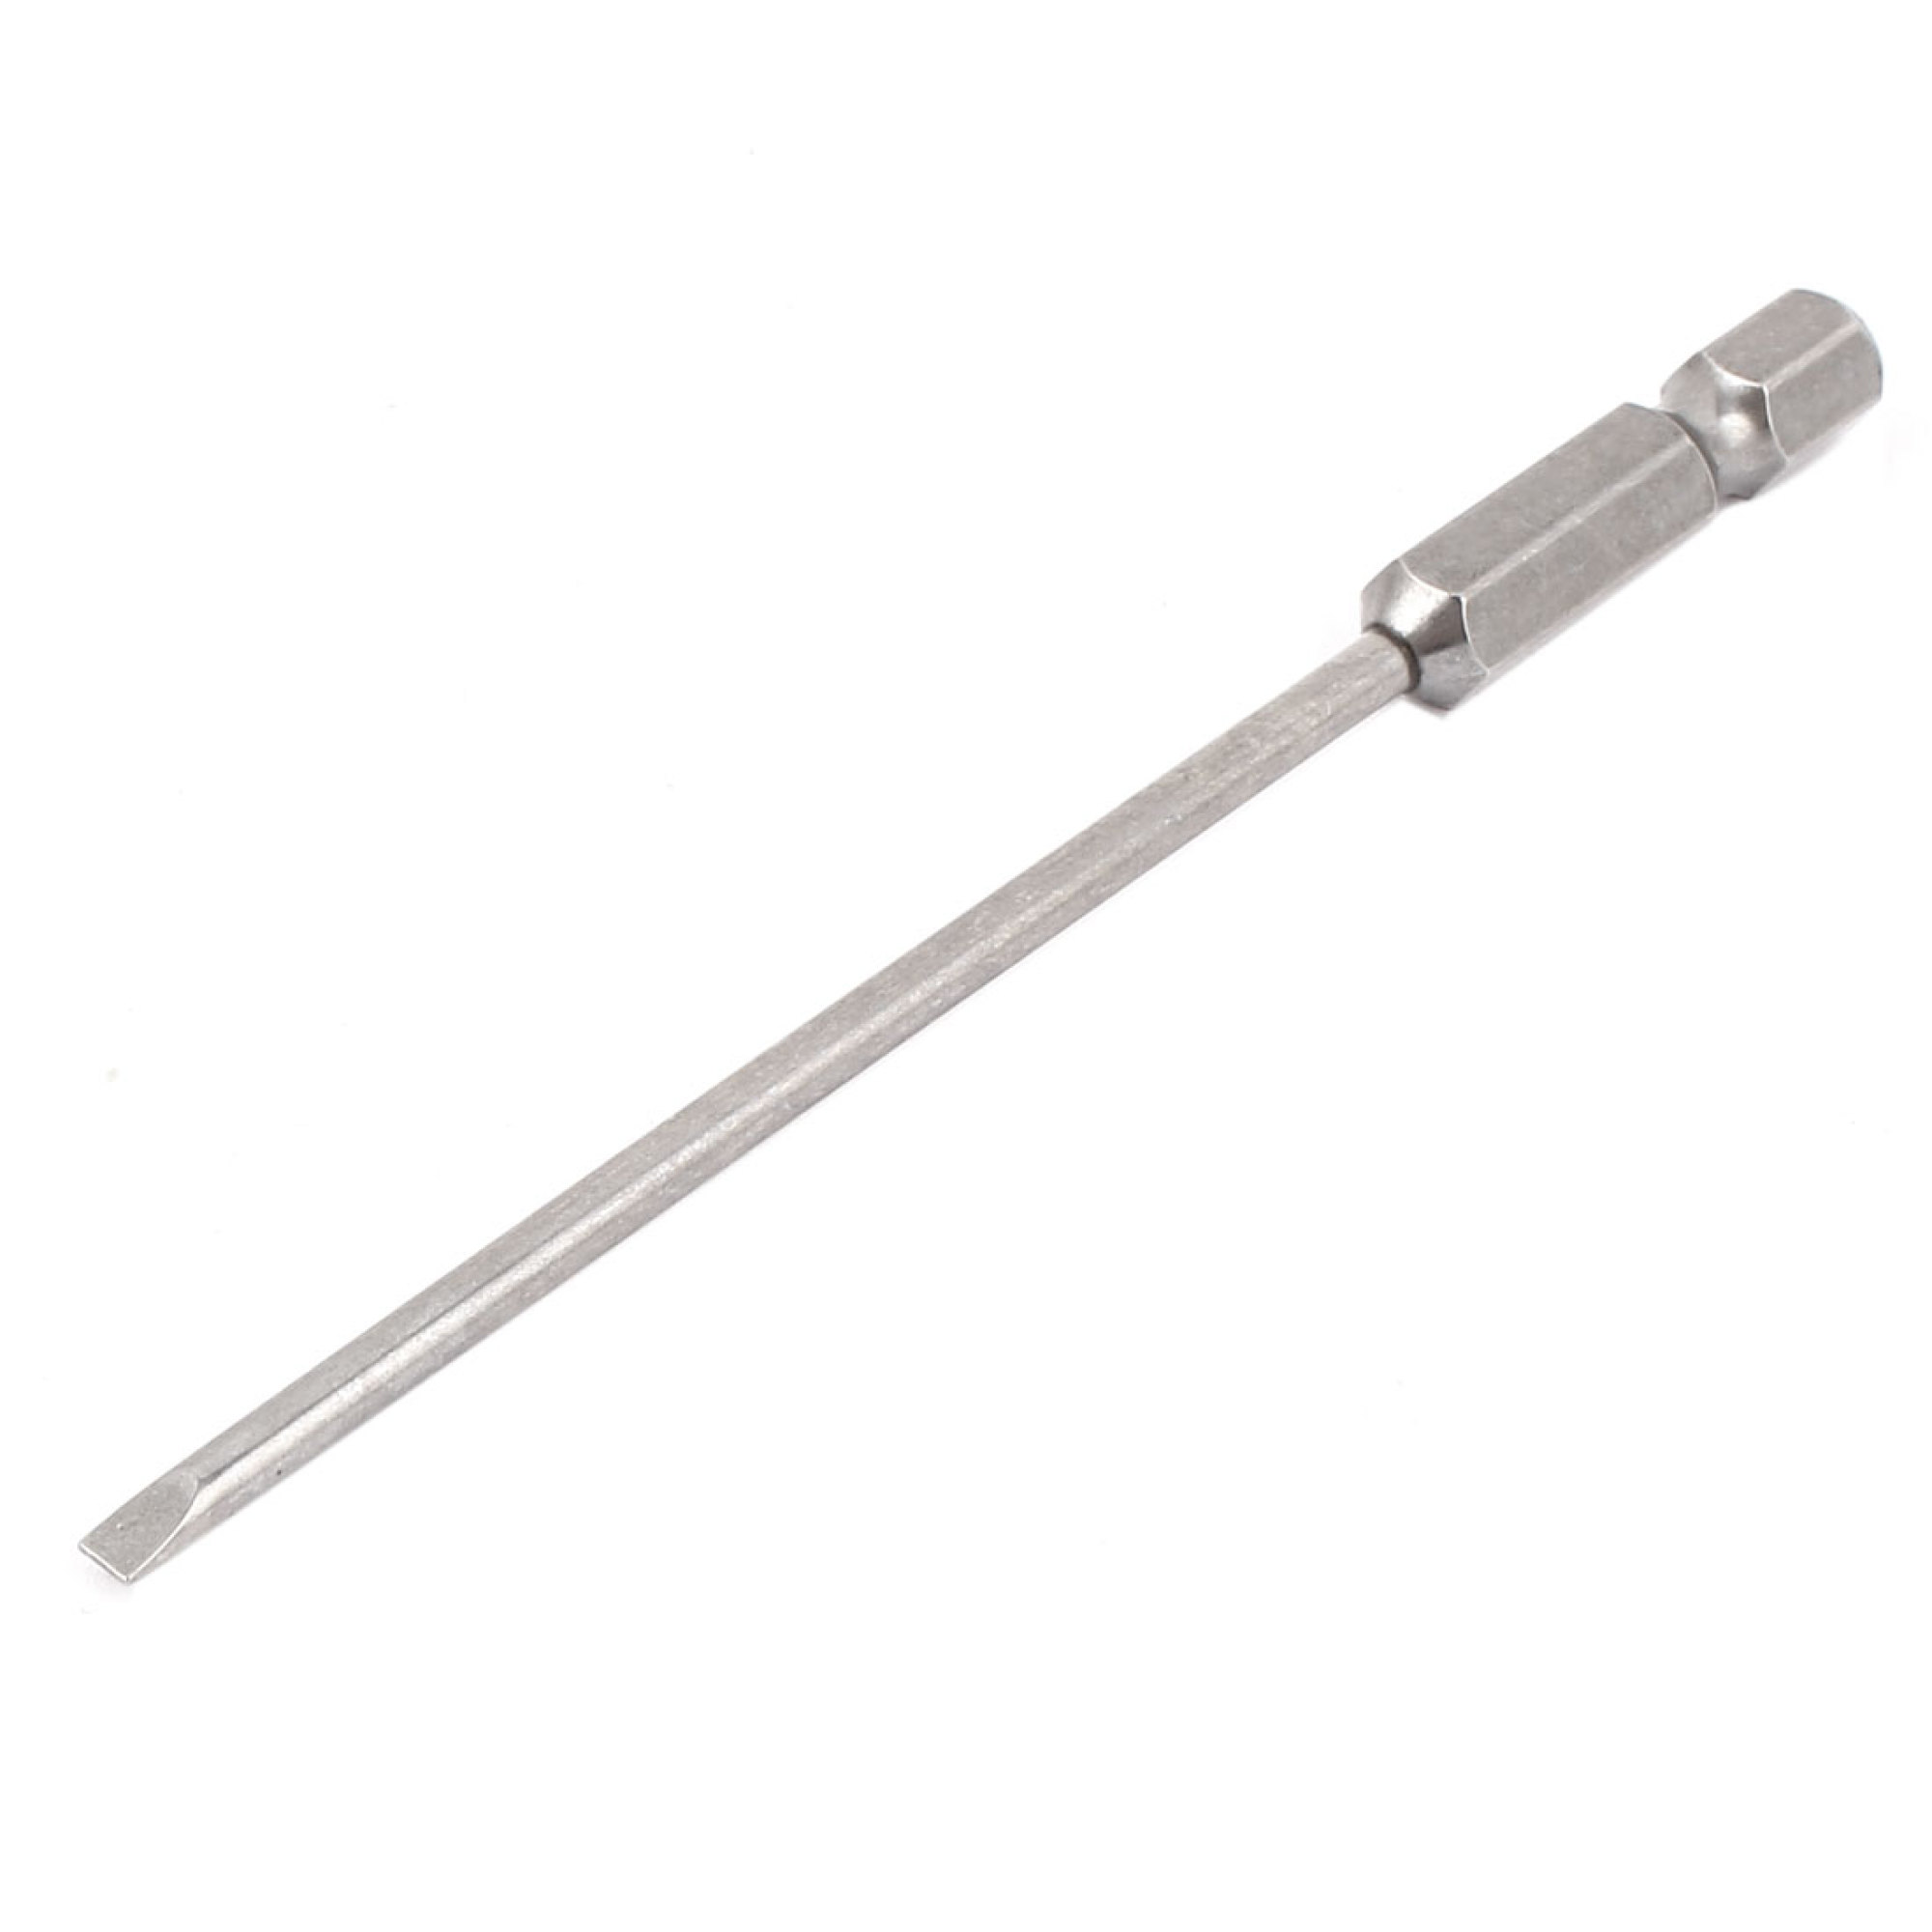 Flat Tip Magnetic Slotted Screwdriver Bit Gray 100mm Long